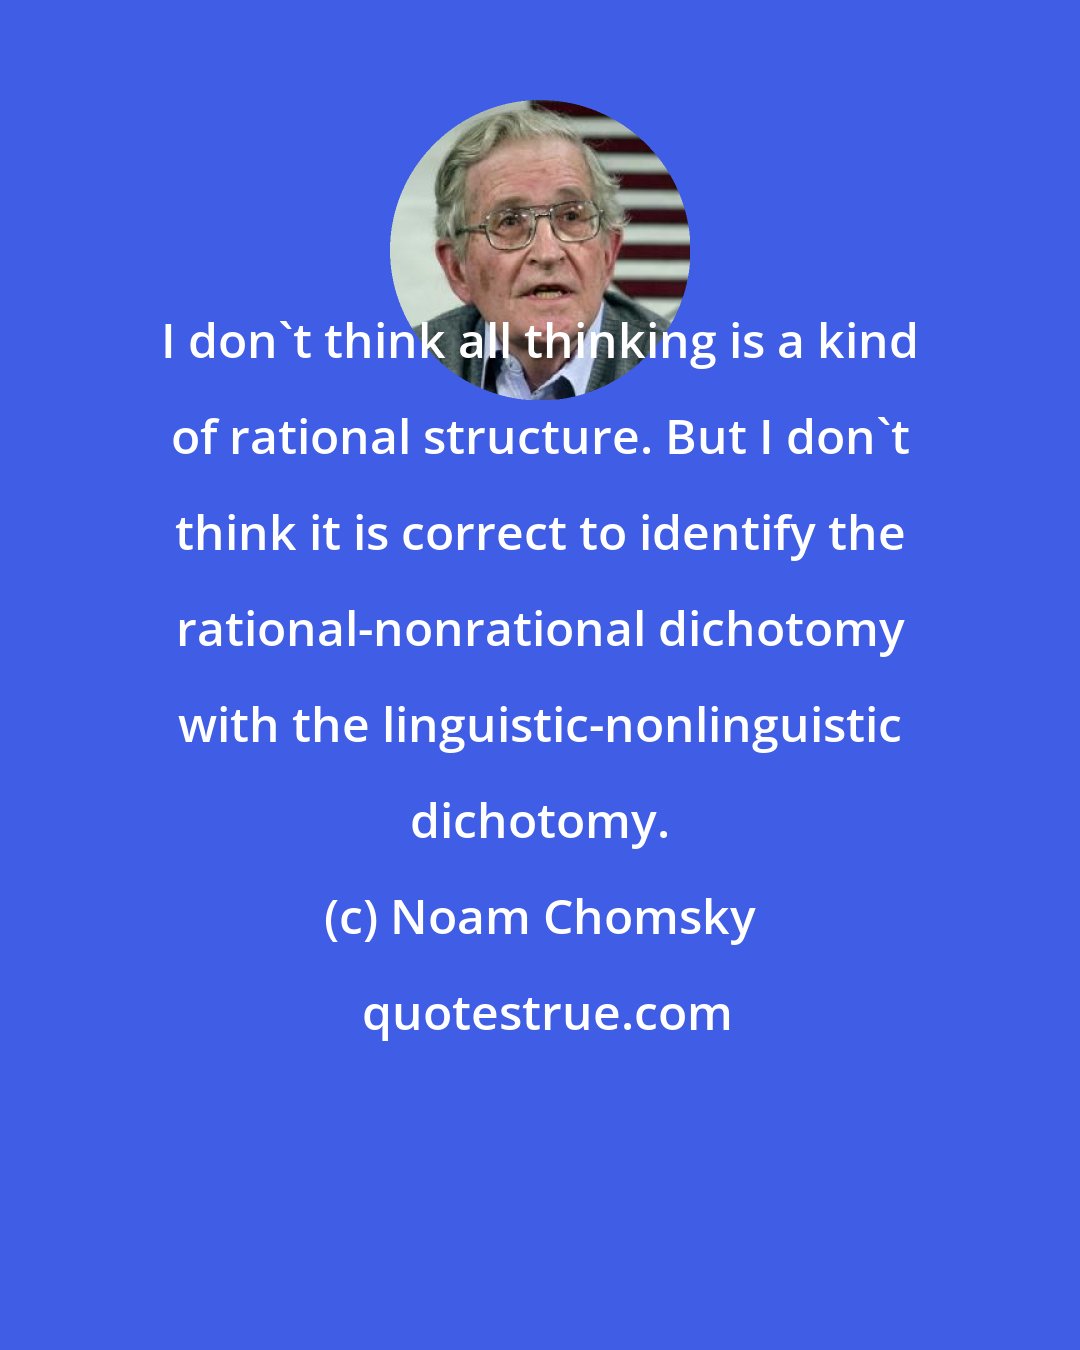 Noam Chomsky: I don't think all thinking is a kind of rational structure. But I don't think it is correct to identify the rational-nonrational dichotomy with the linguistic-nonlinguistic dichotomy.